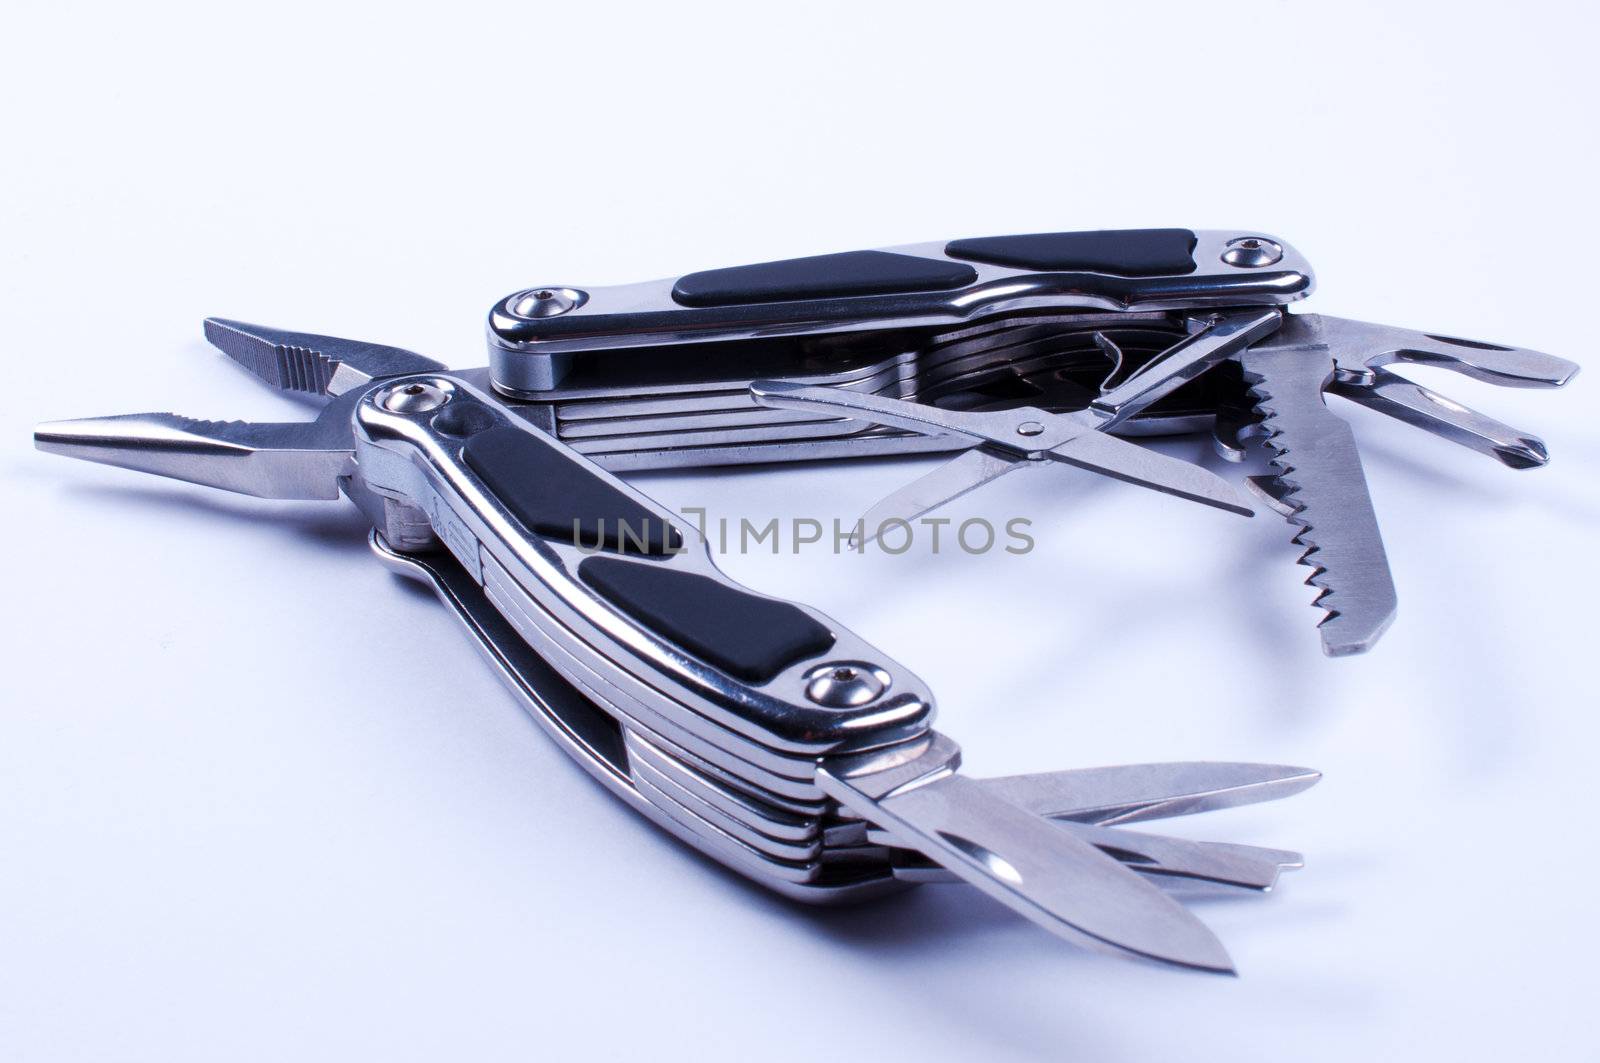 Fully unfolded multy tool on white background